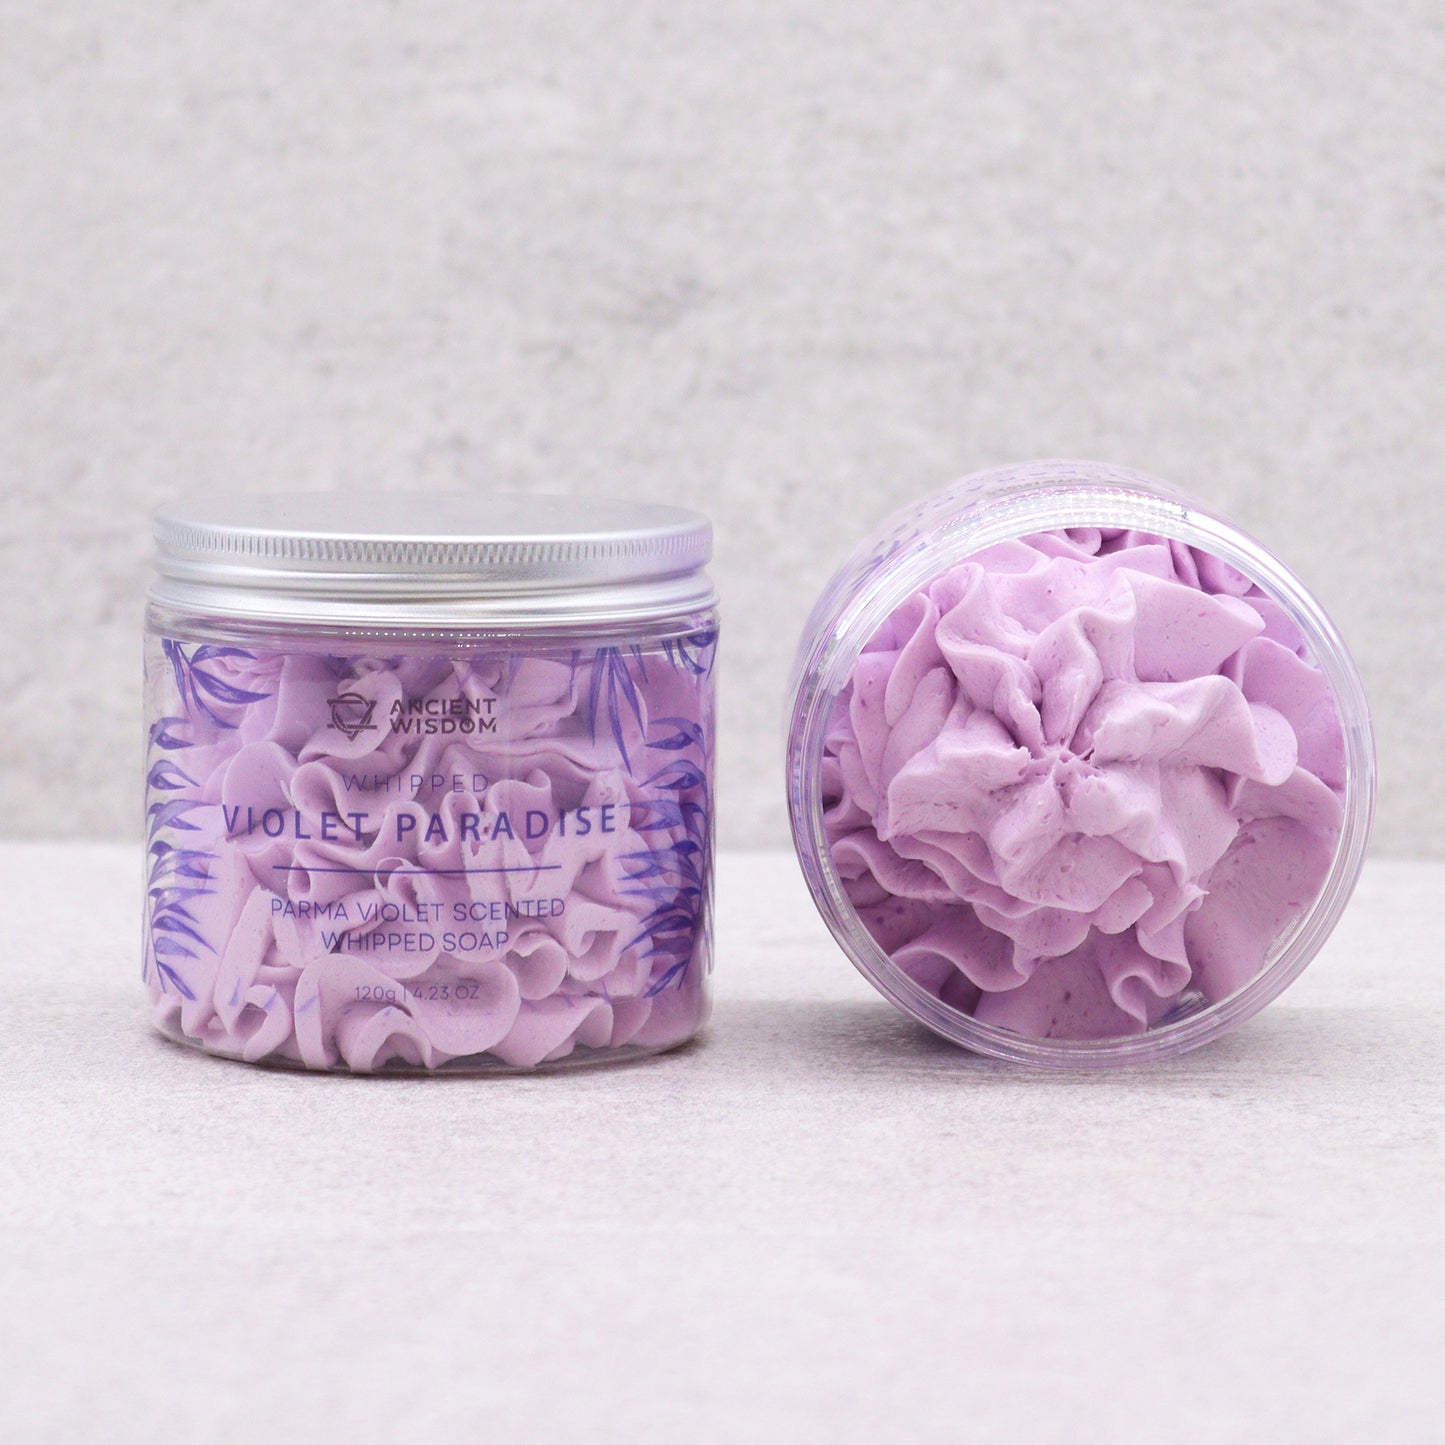 Parma Violet Whipped Cream Soap 120g